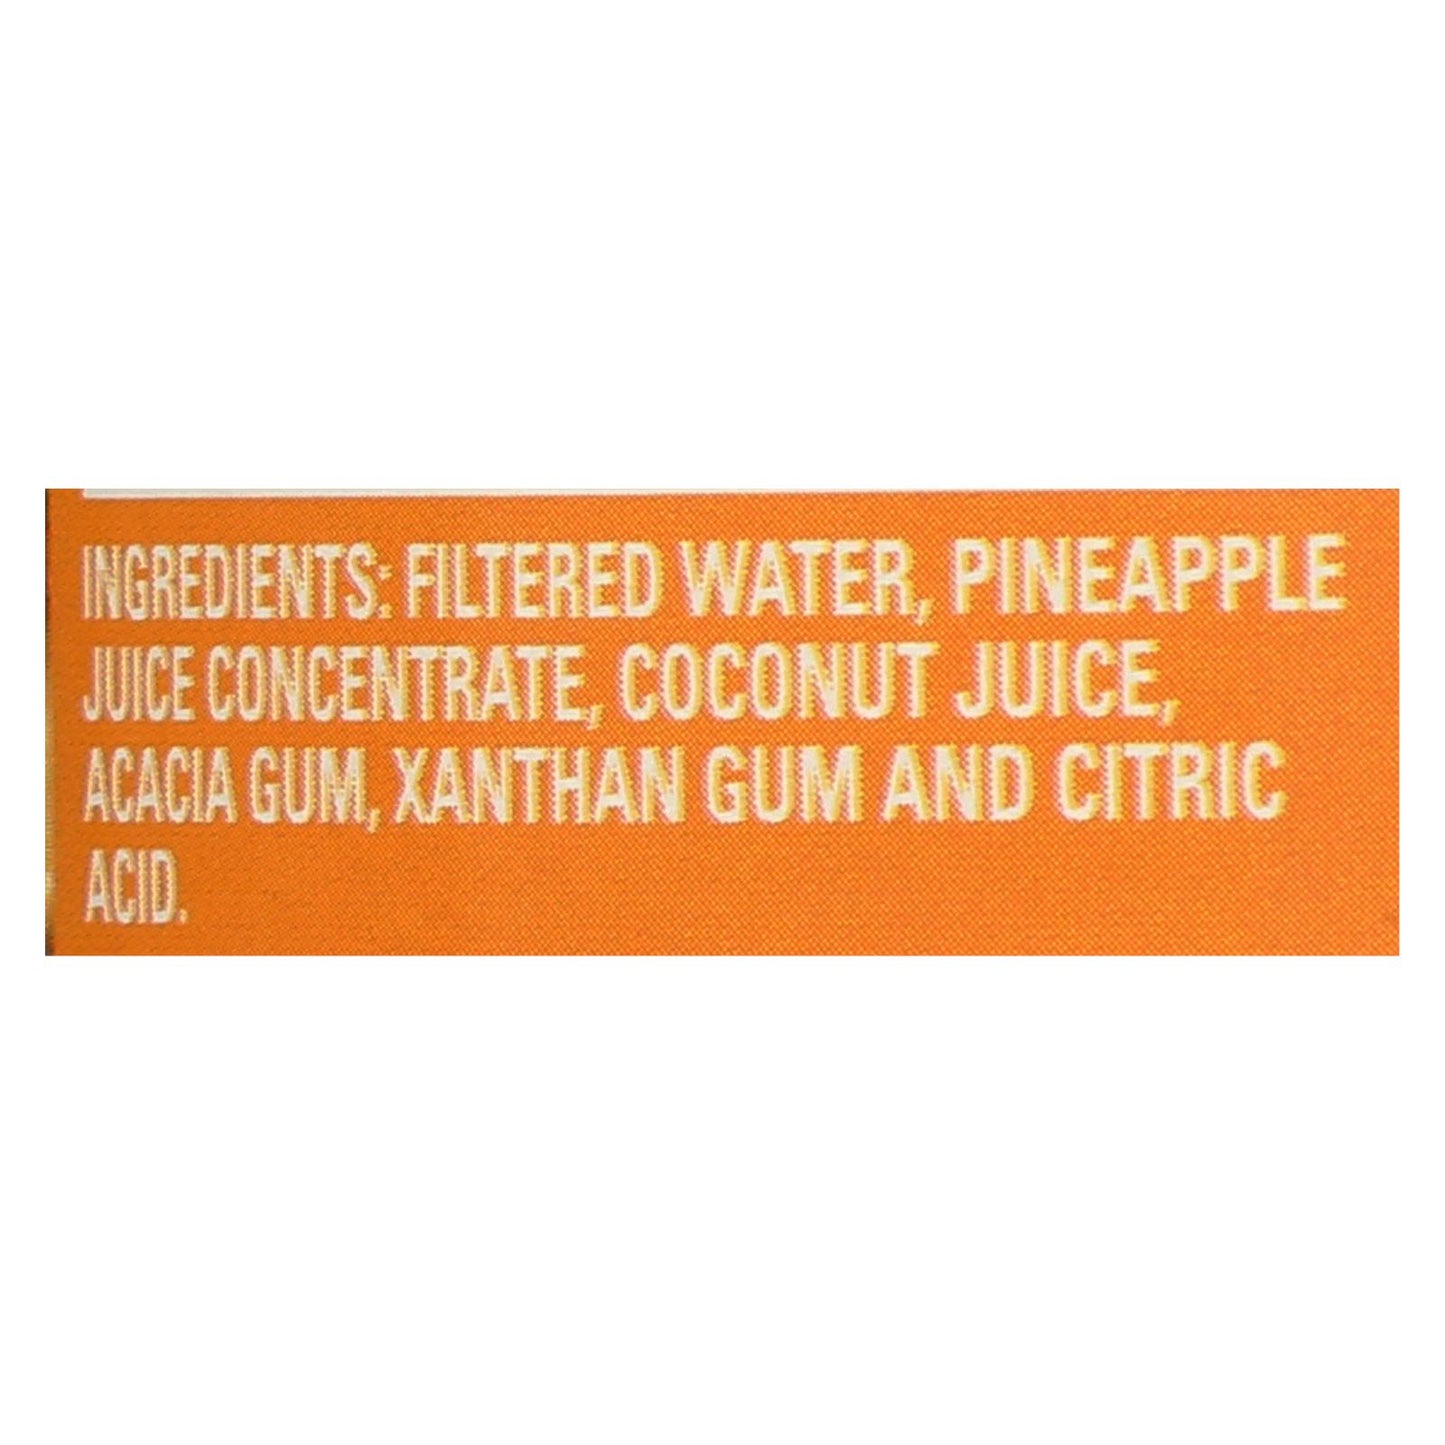 L And A Juice - Pineapple Coconut - Case Of 6 - 32 Fl Oz.